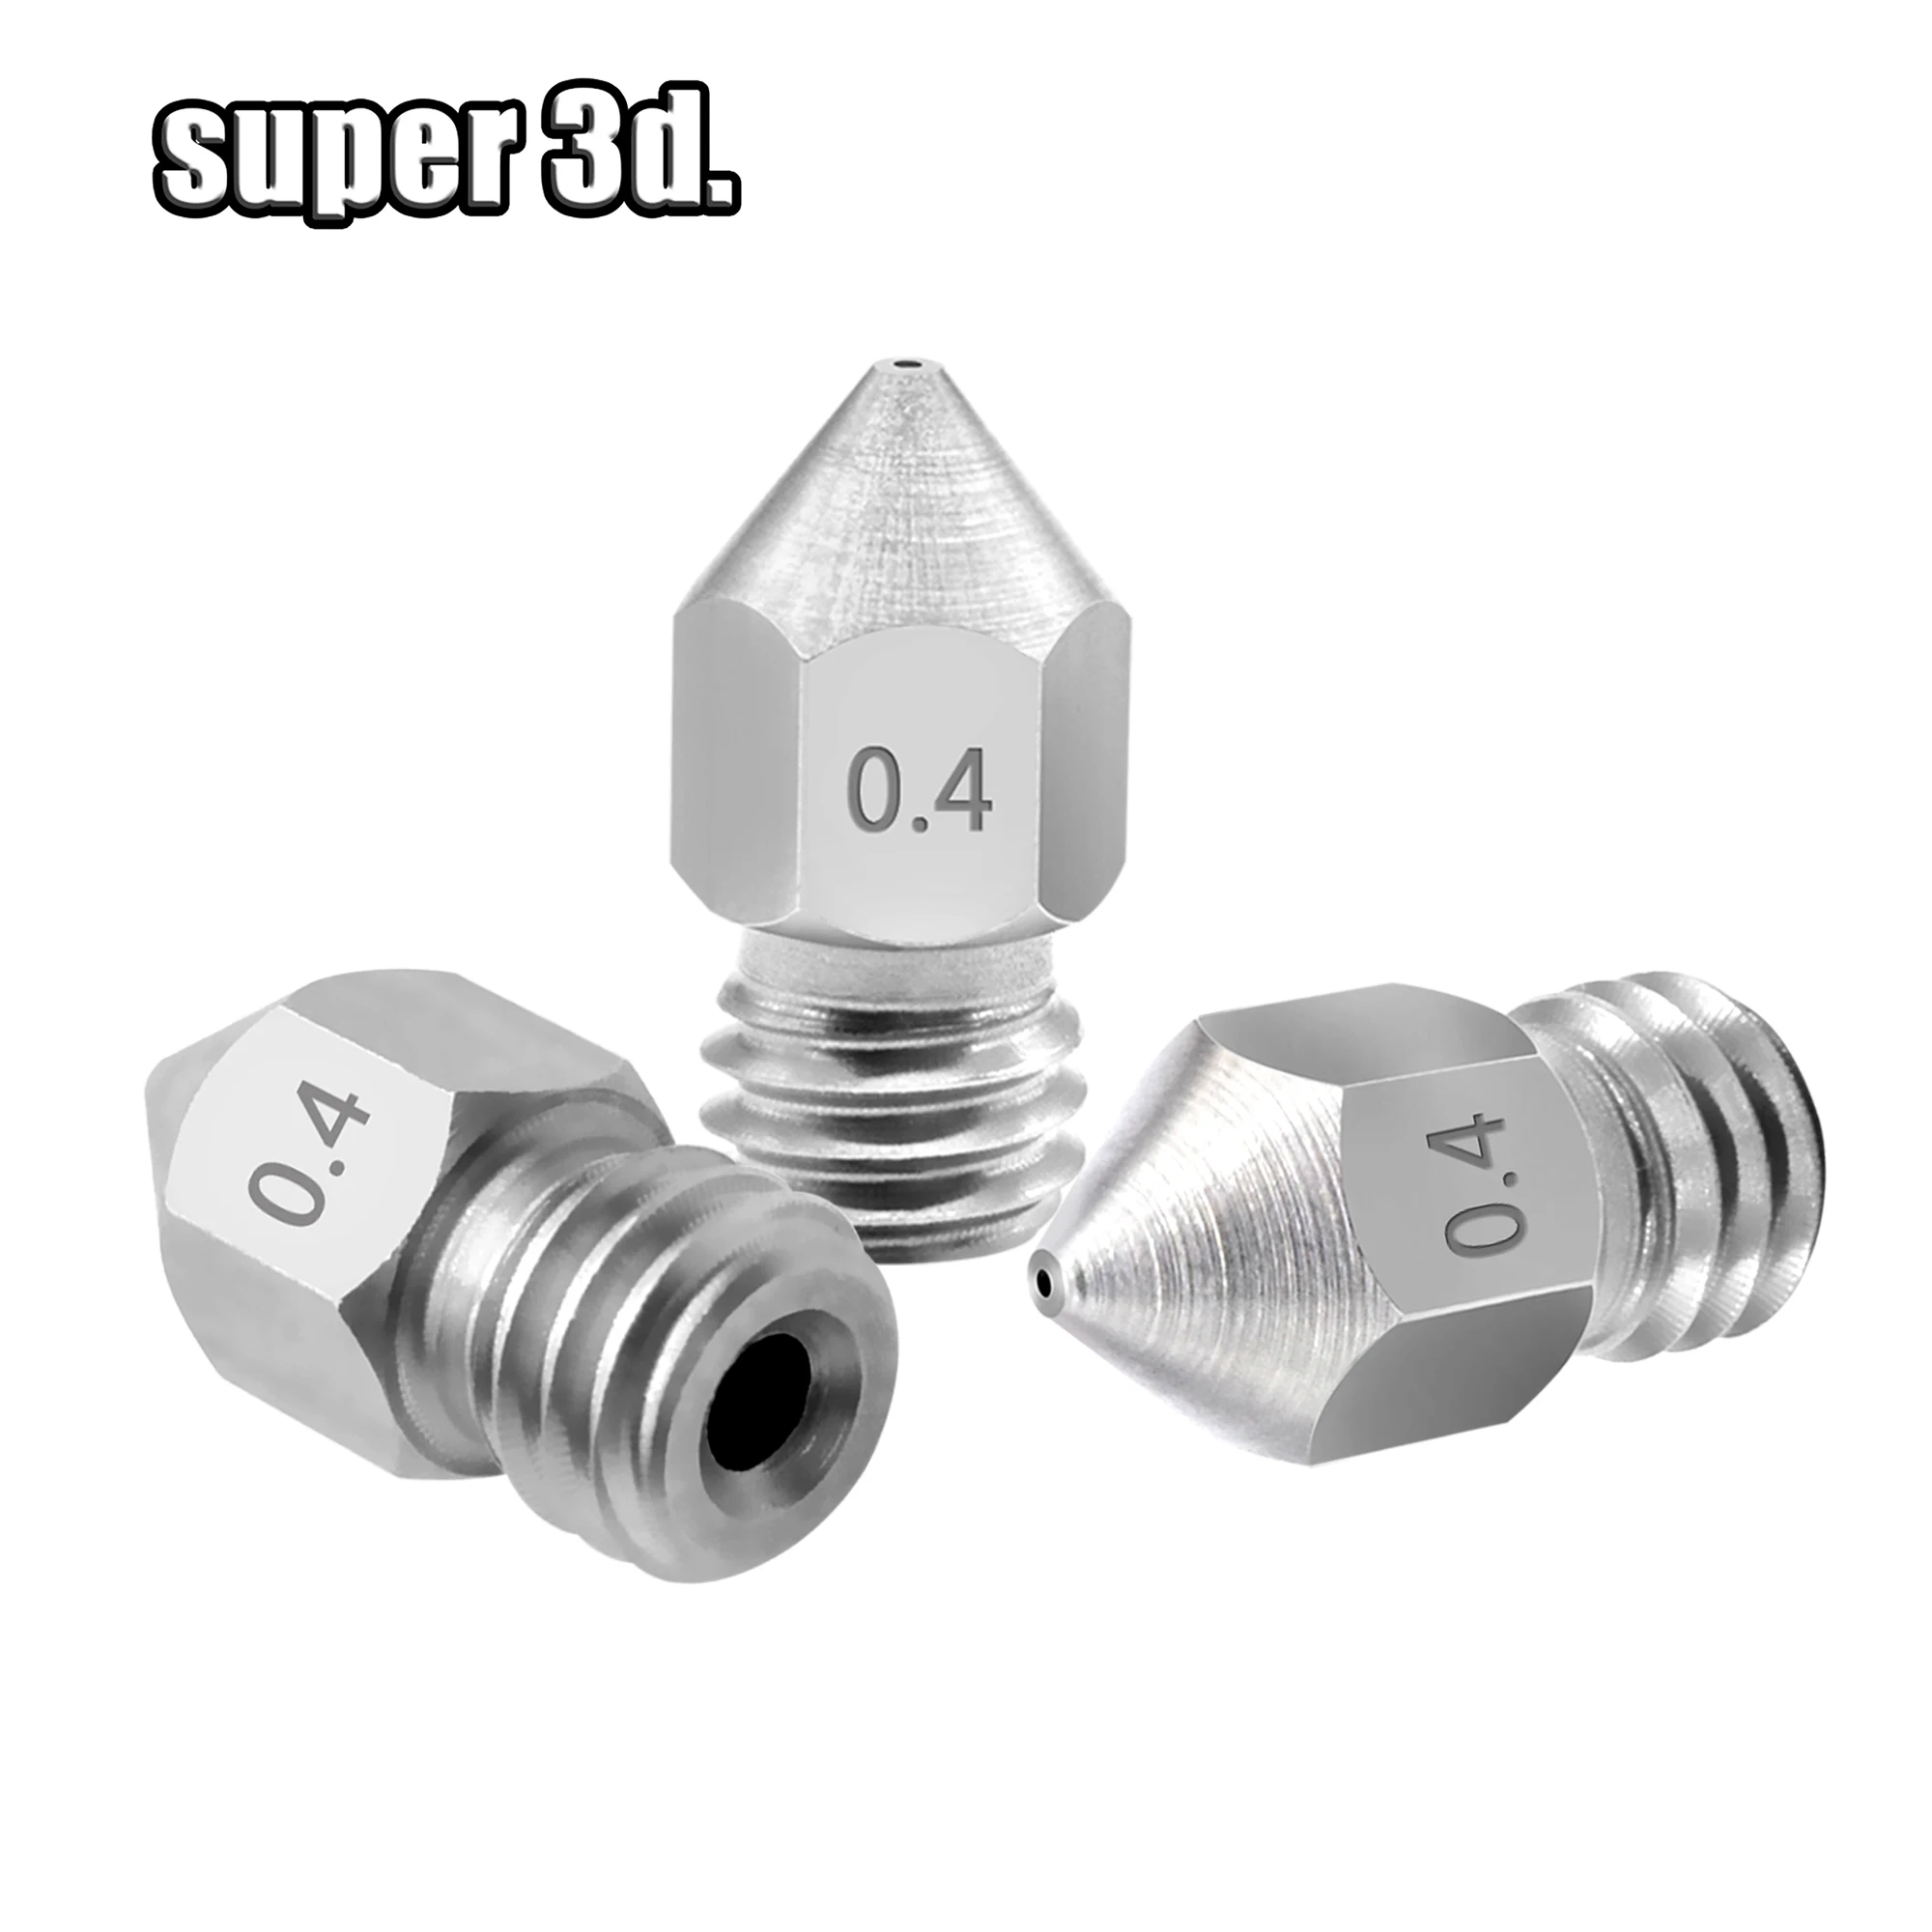 1pcs MK8 Hardened steel Die Steel Nozzle 0.4mm M6 threaded for 1.75mm filament 3D printer parts